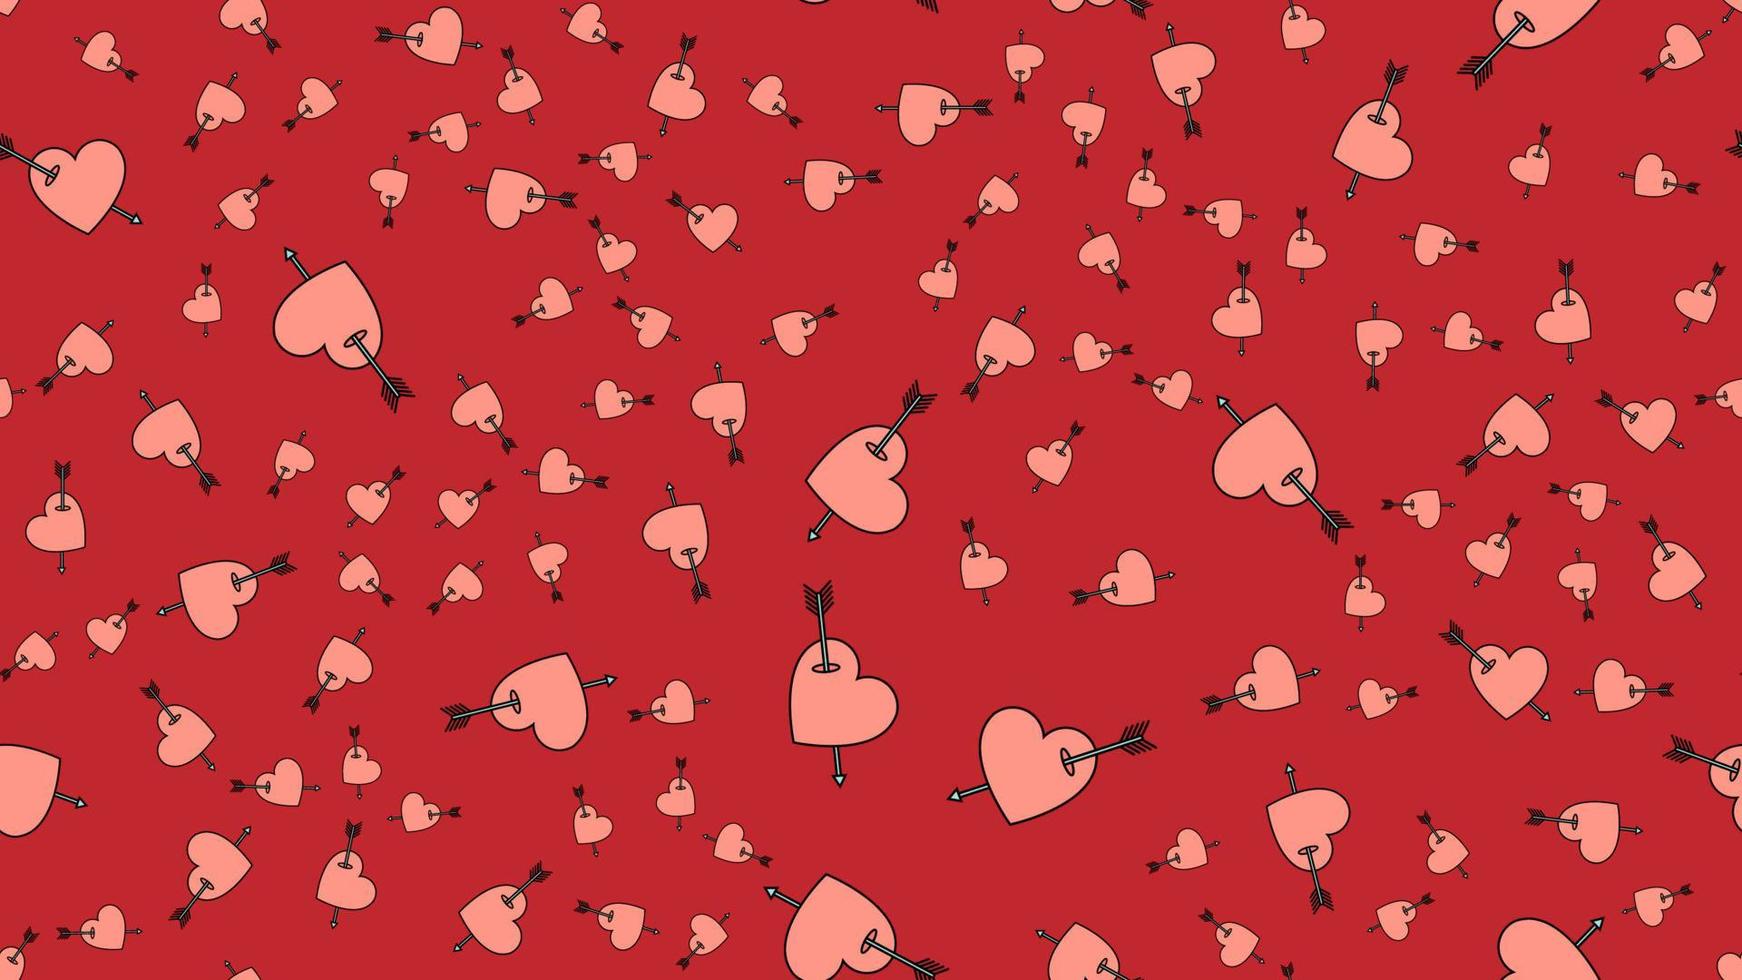 Texture endless seamless pattern from flat icons of hearts with arrows, love items for the holiday of love Valentine's Day February 14 or March 8 on a red background. Vector illustration